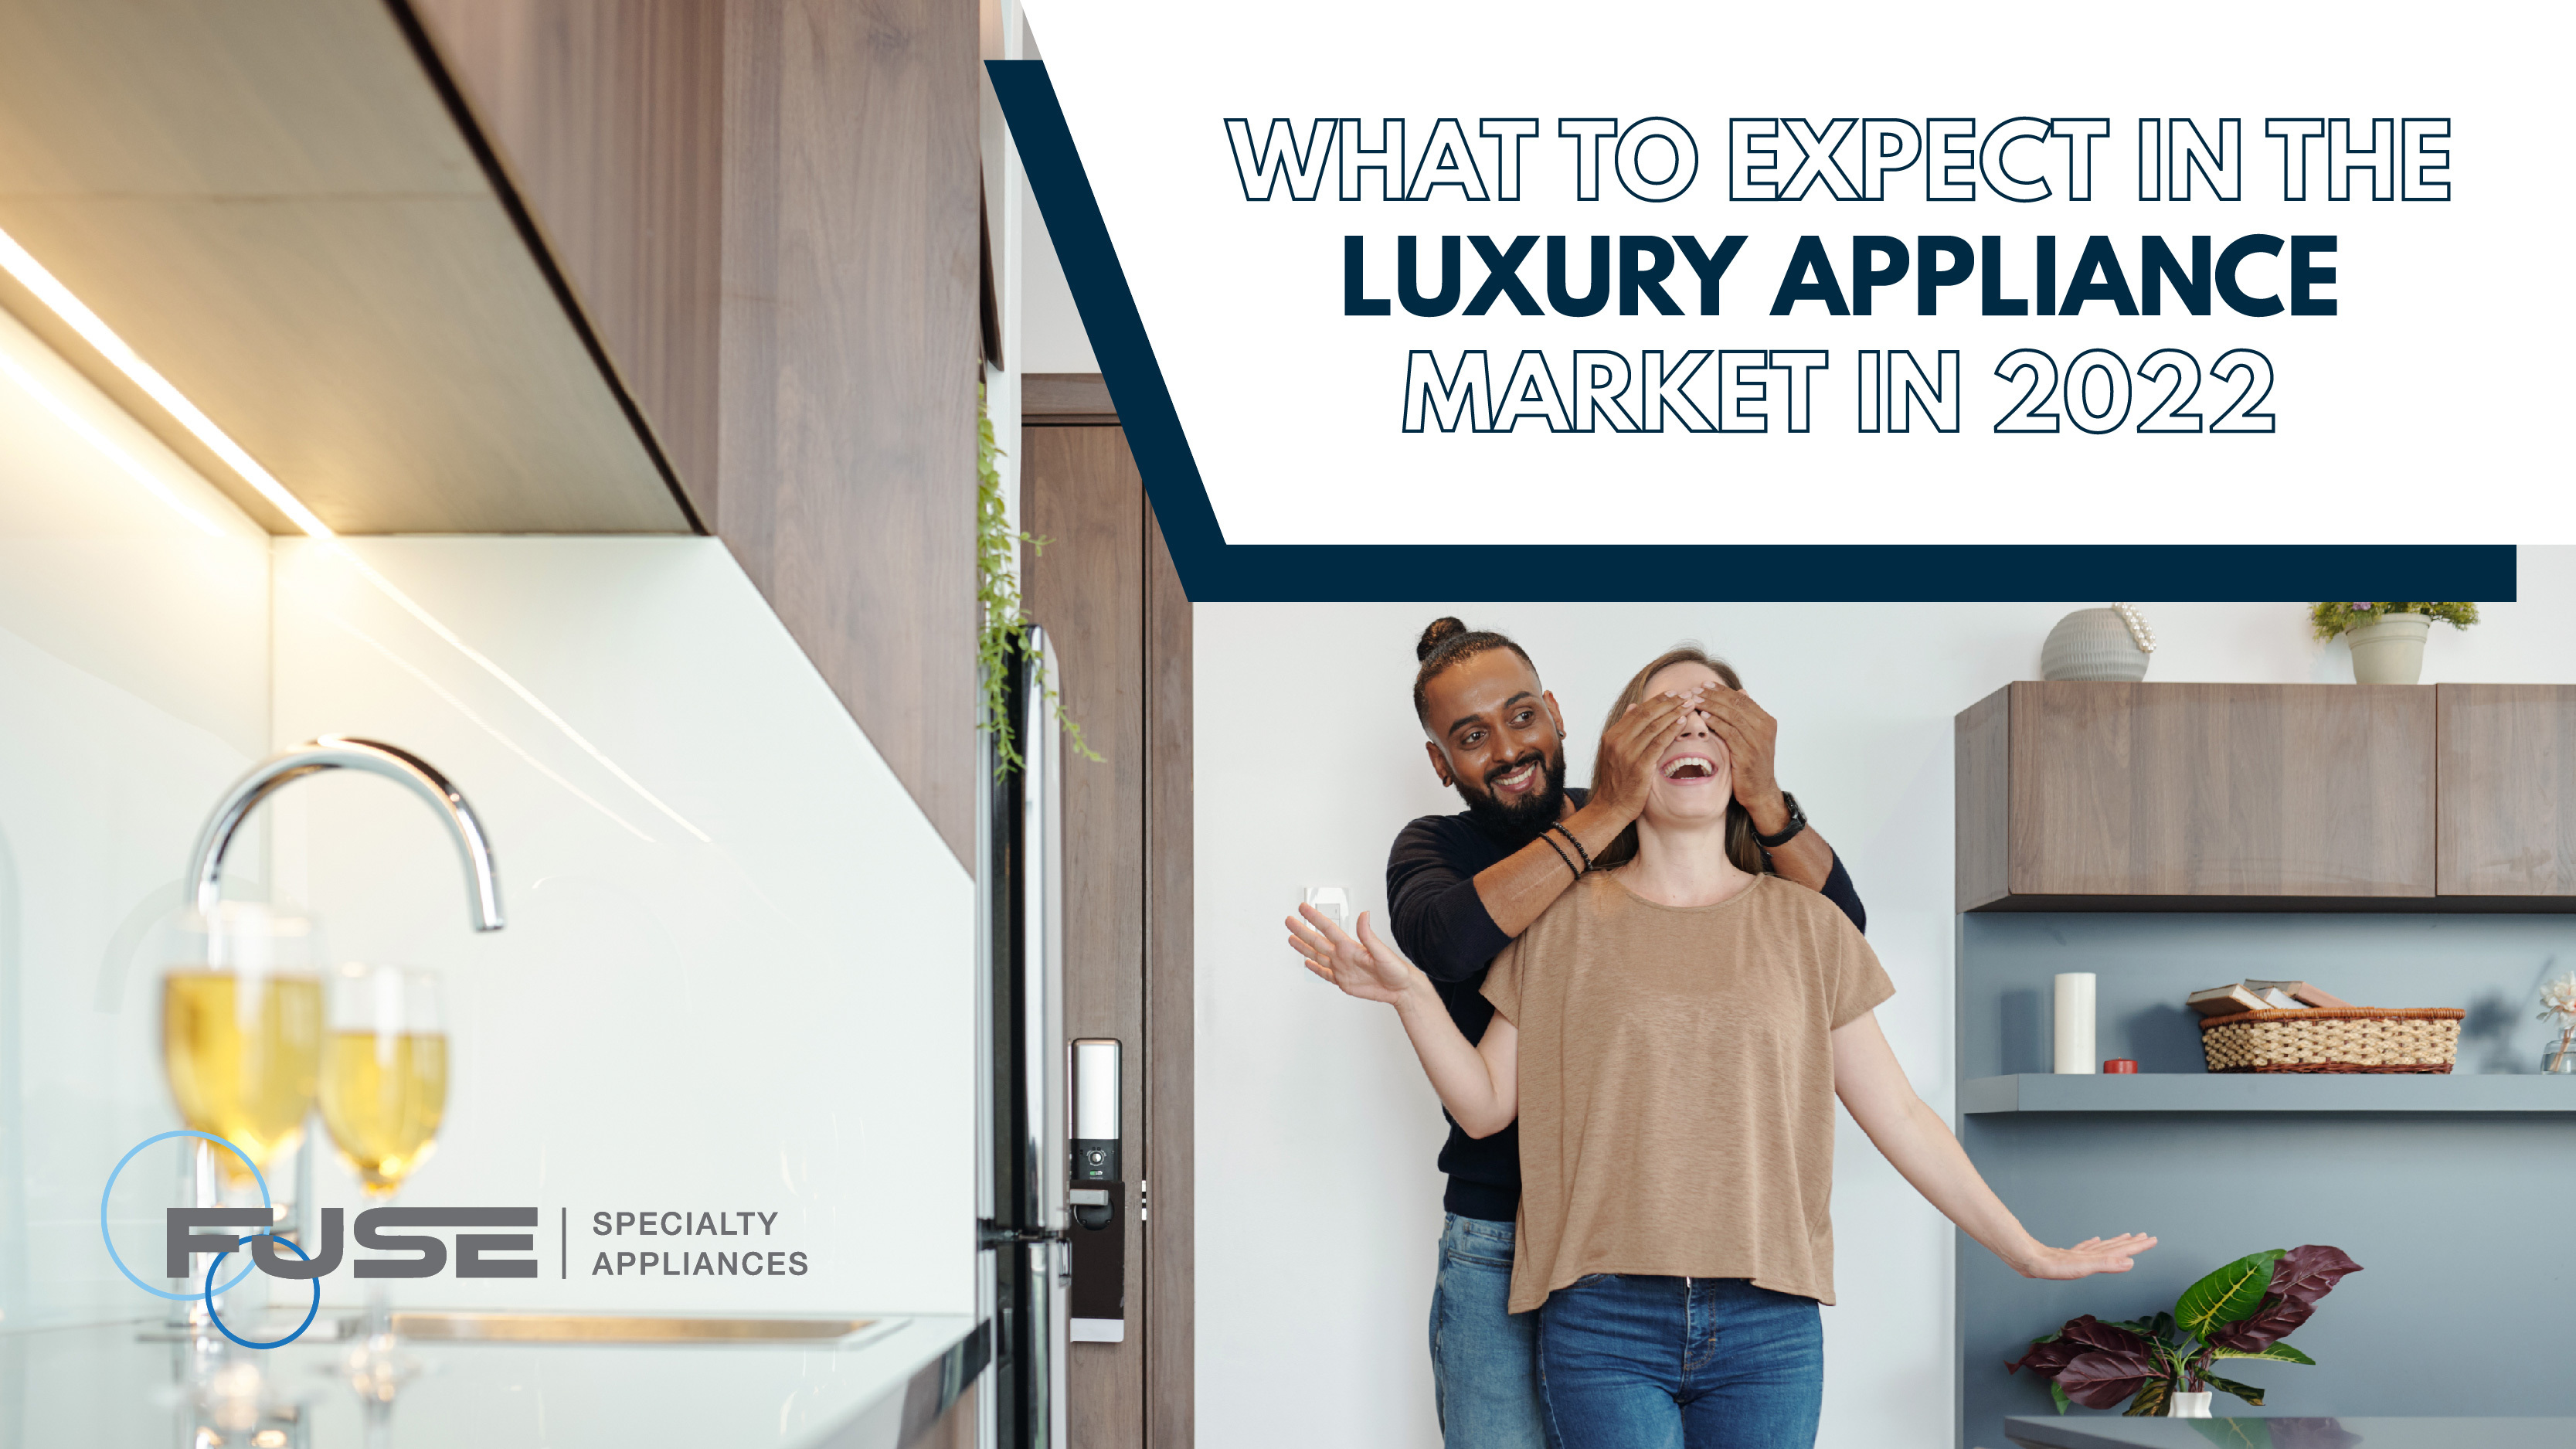 What to Expect in the Luxury Appliance Market in 2022